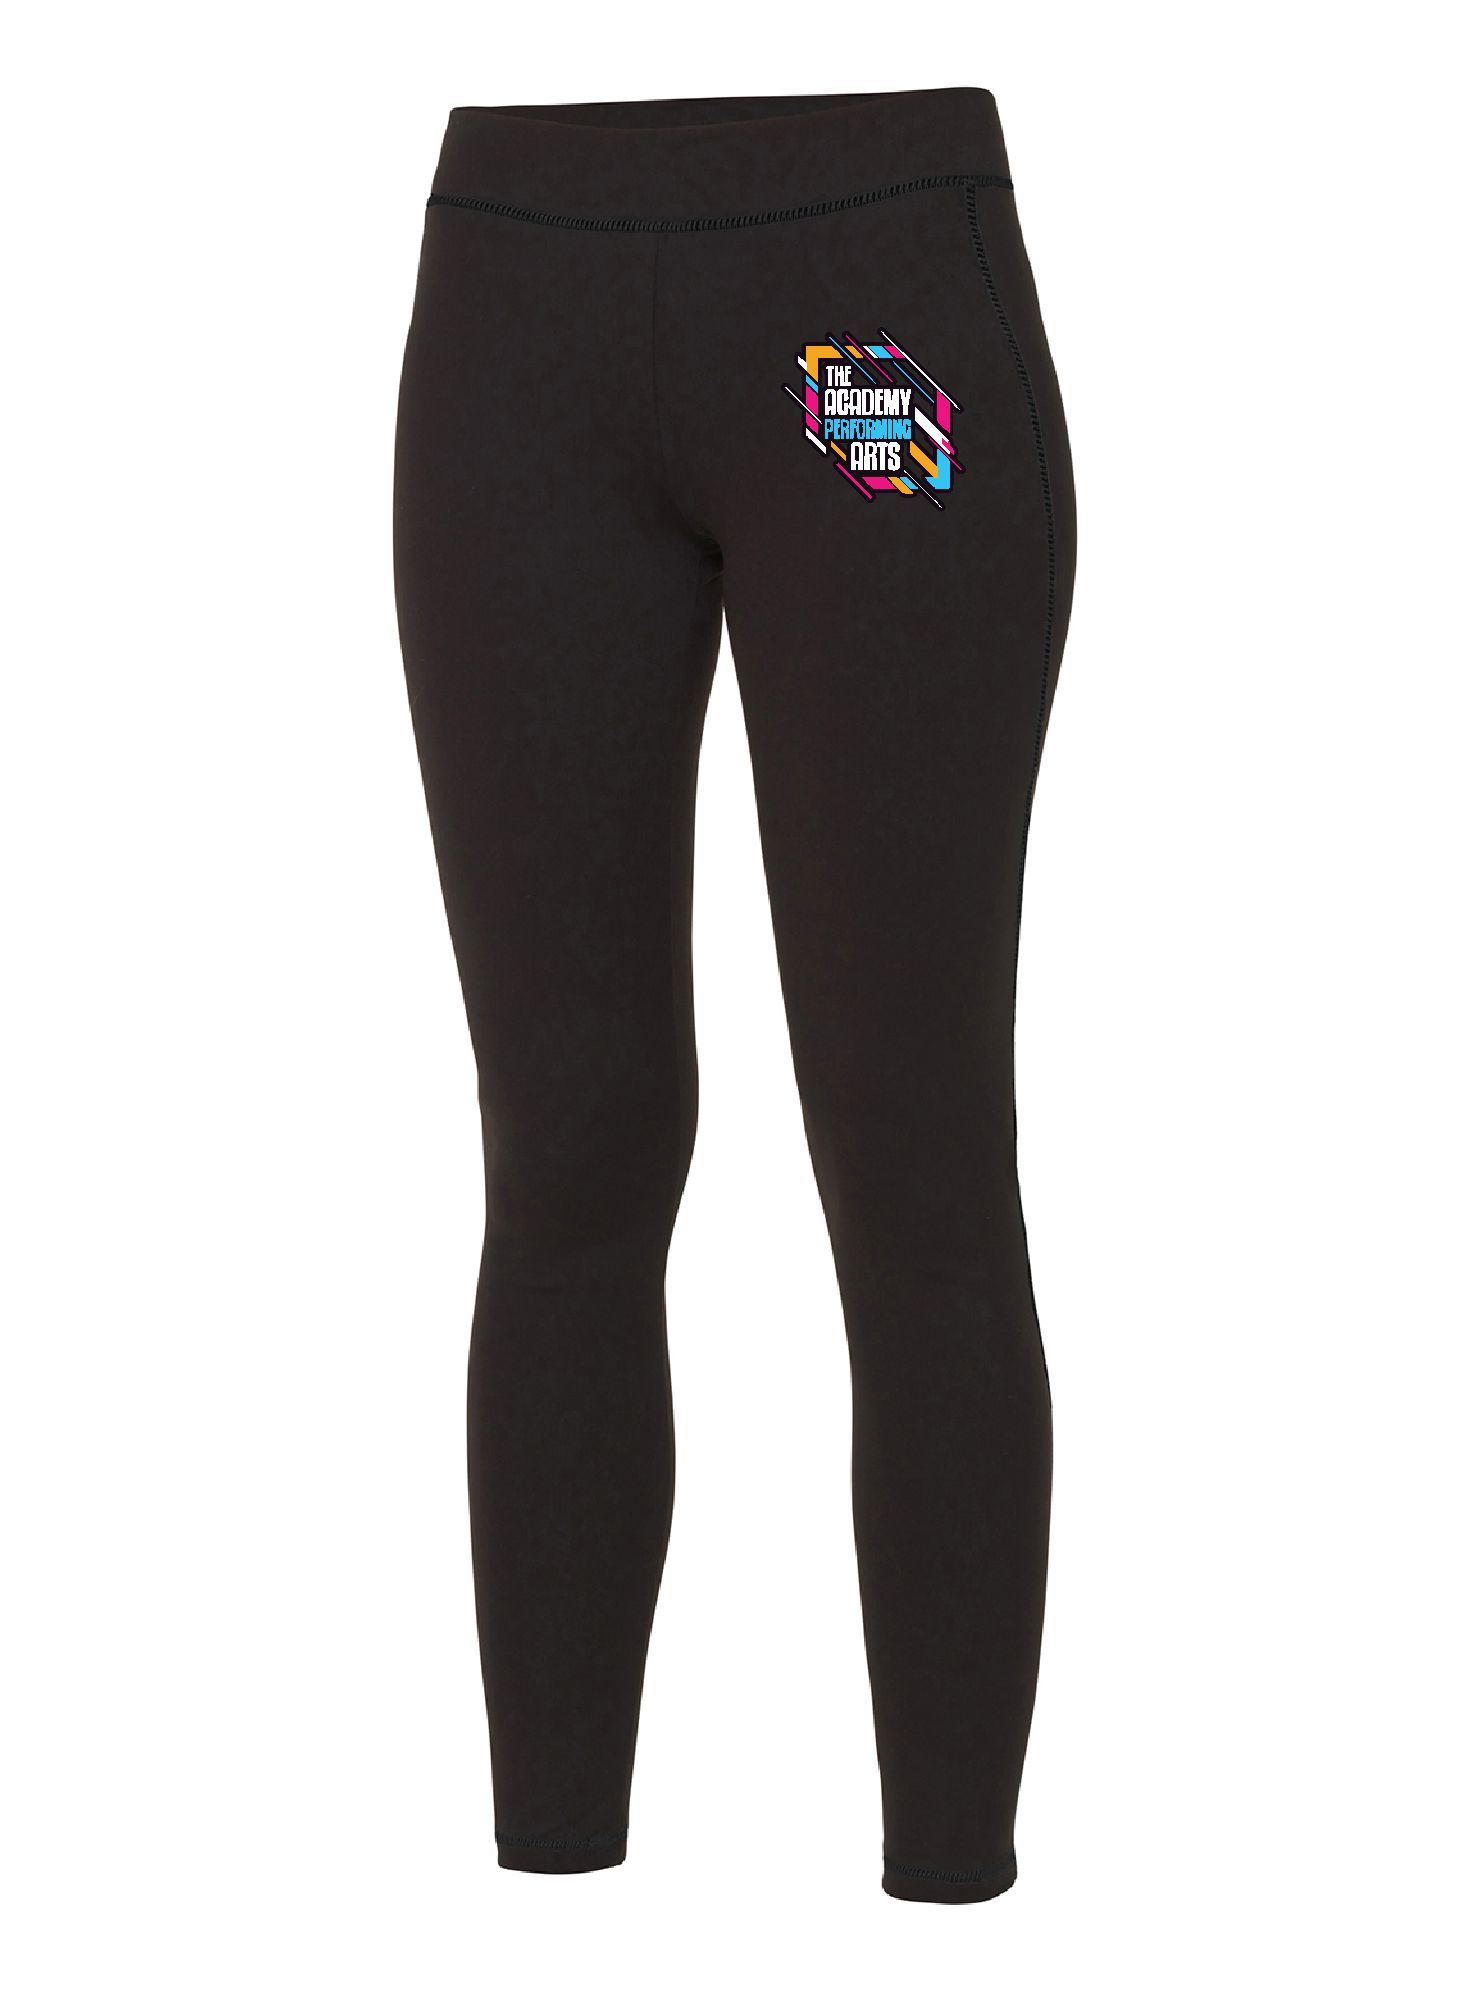 The Academy – Leggings (Adults)